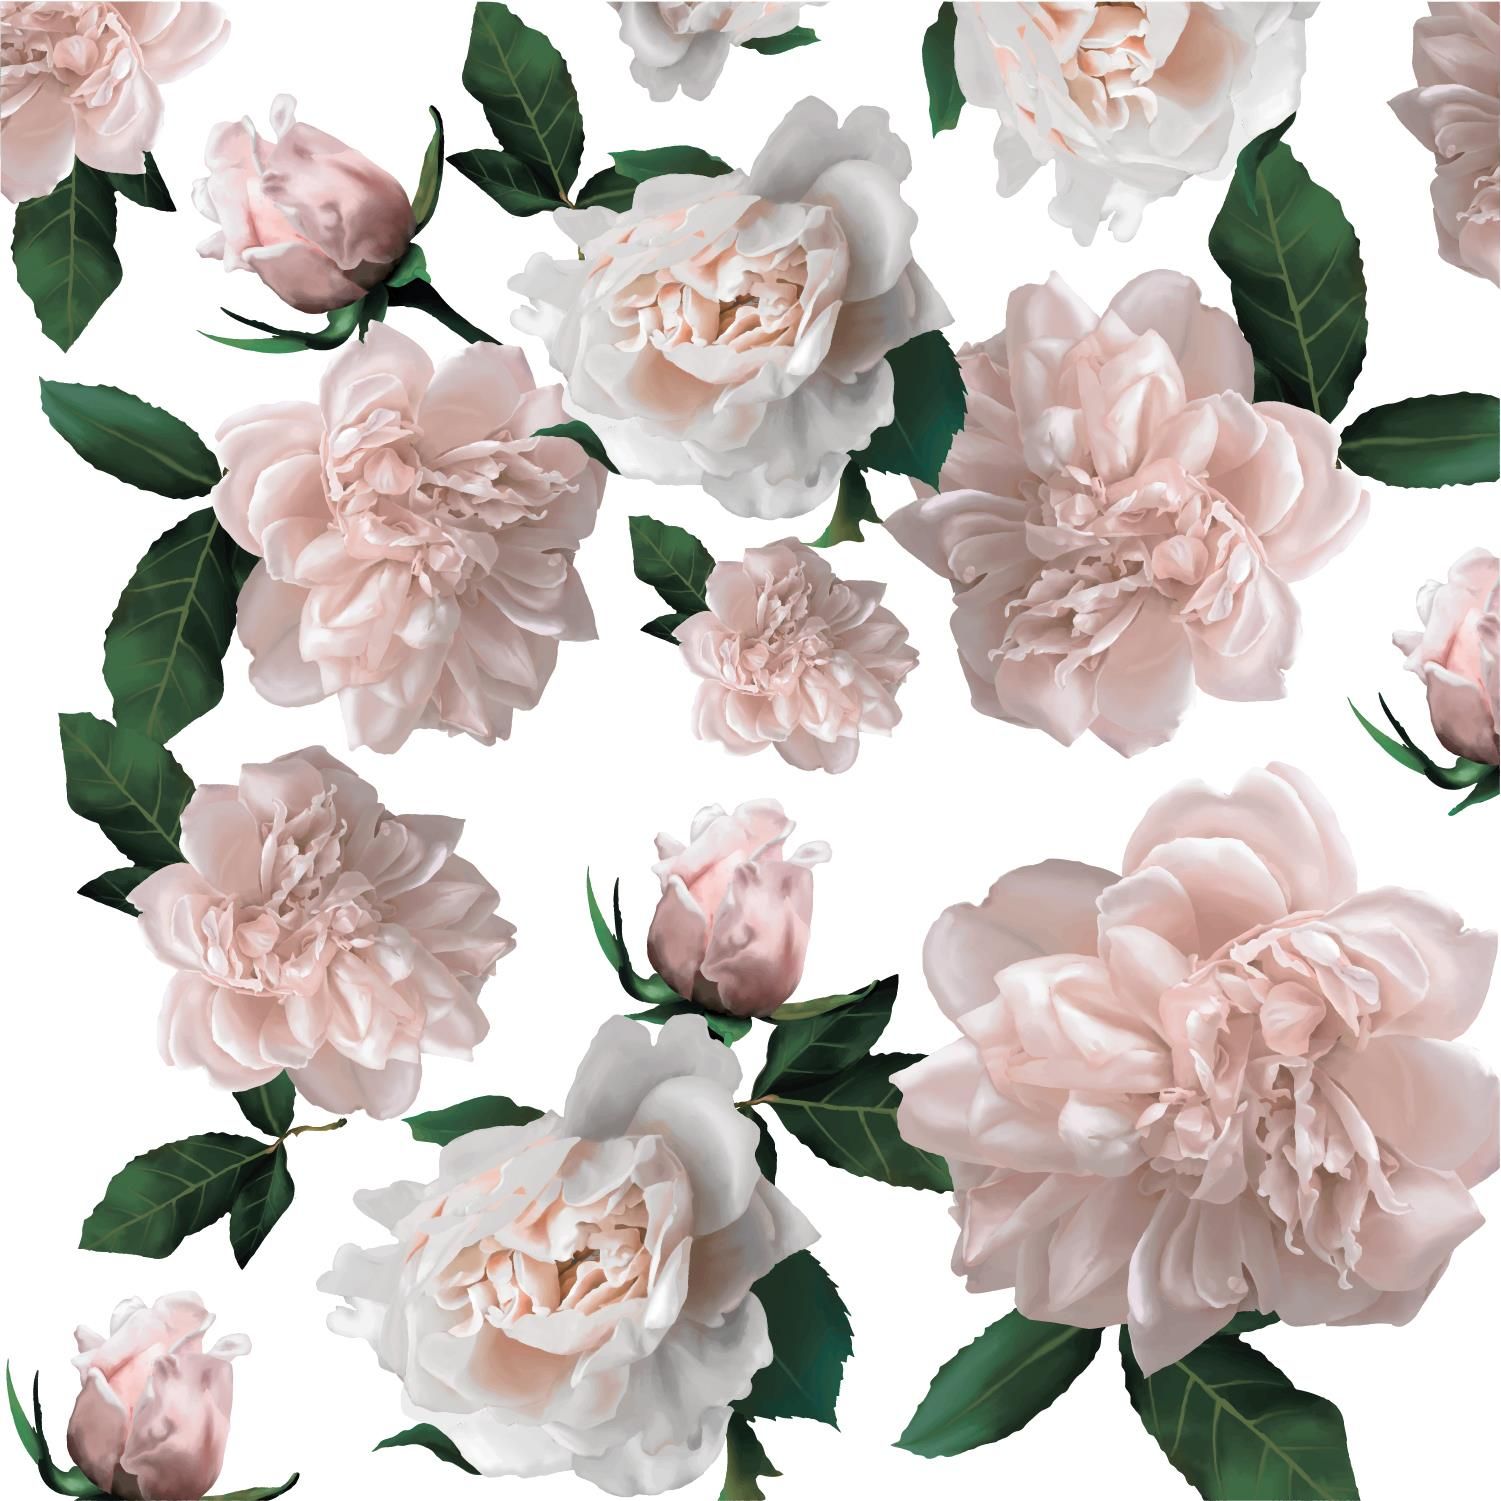 - Add glamour and a warm touch to your rooms with our Oversized Classic Roses stickers set! 
- This product is easy to apply and easily removable using hair dryer. 
- If applied on wallpaper the sticker will NOT be REMOVABLE.Can be applied on laminated surfaces. 
- Please note that every effort is made to the illustration of our items accurately, however the colour may differ slightly when the product is applied on the mirror (due to the sunlight) and wall colour surfaces but might cause damage when removed. 
- The package contains 1 sheet of 60 x 90 cm containing 12 stickers.